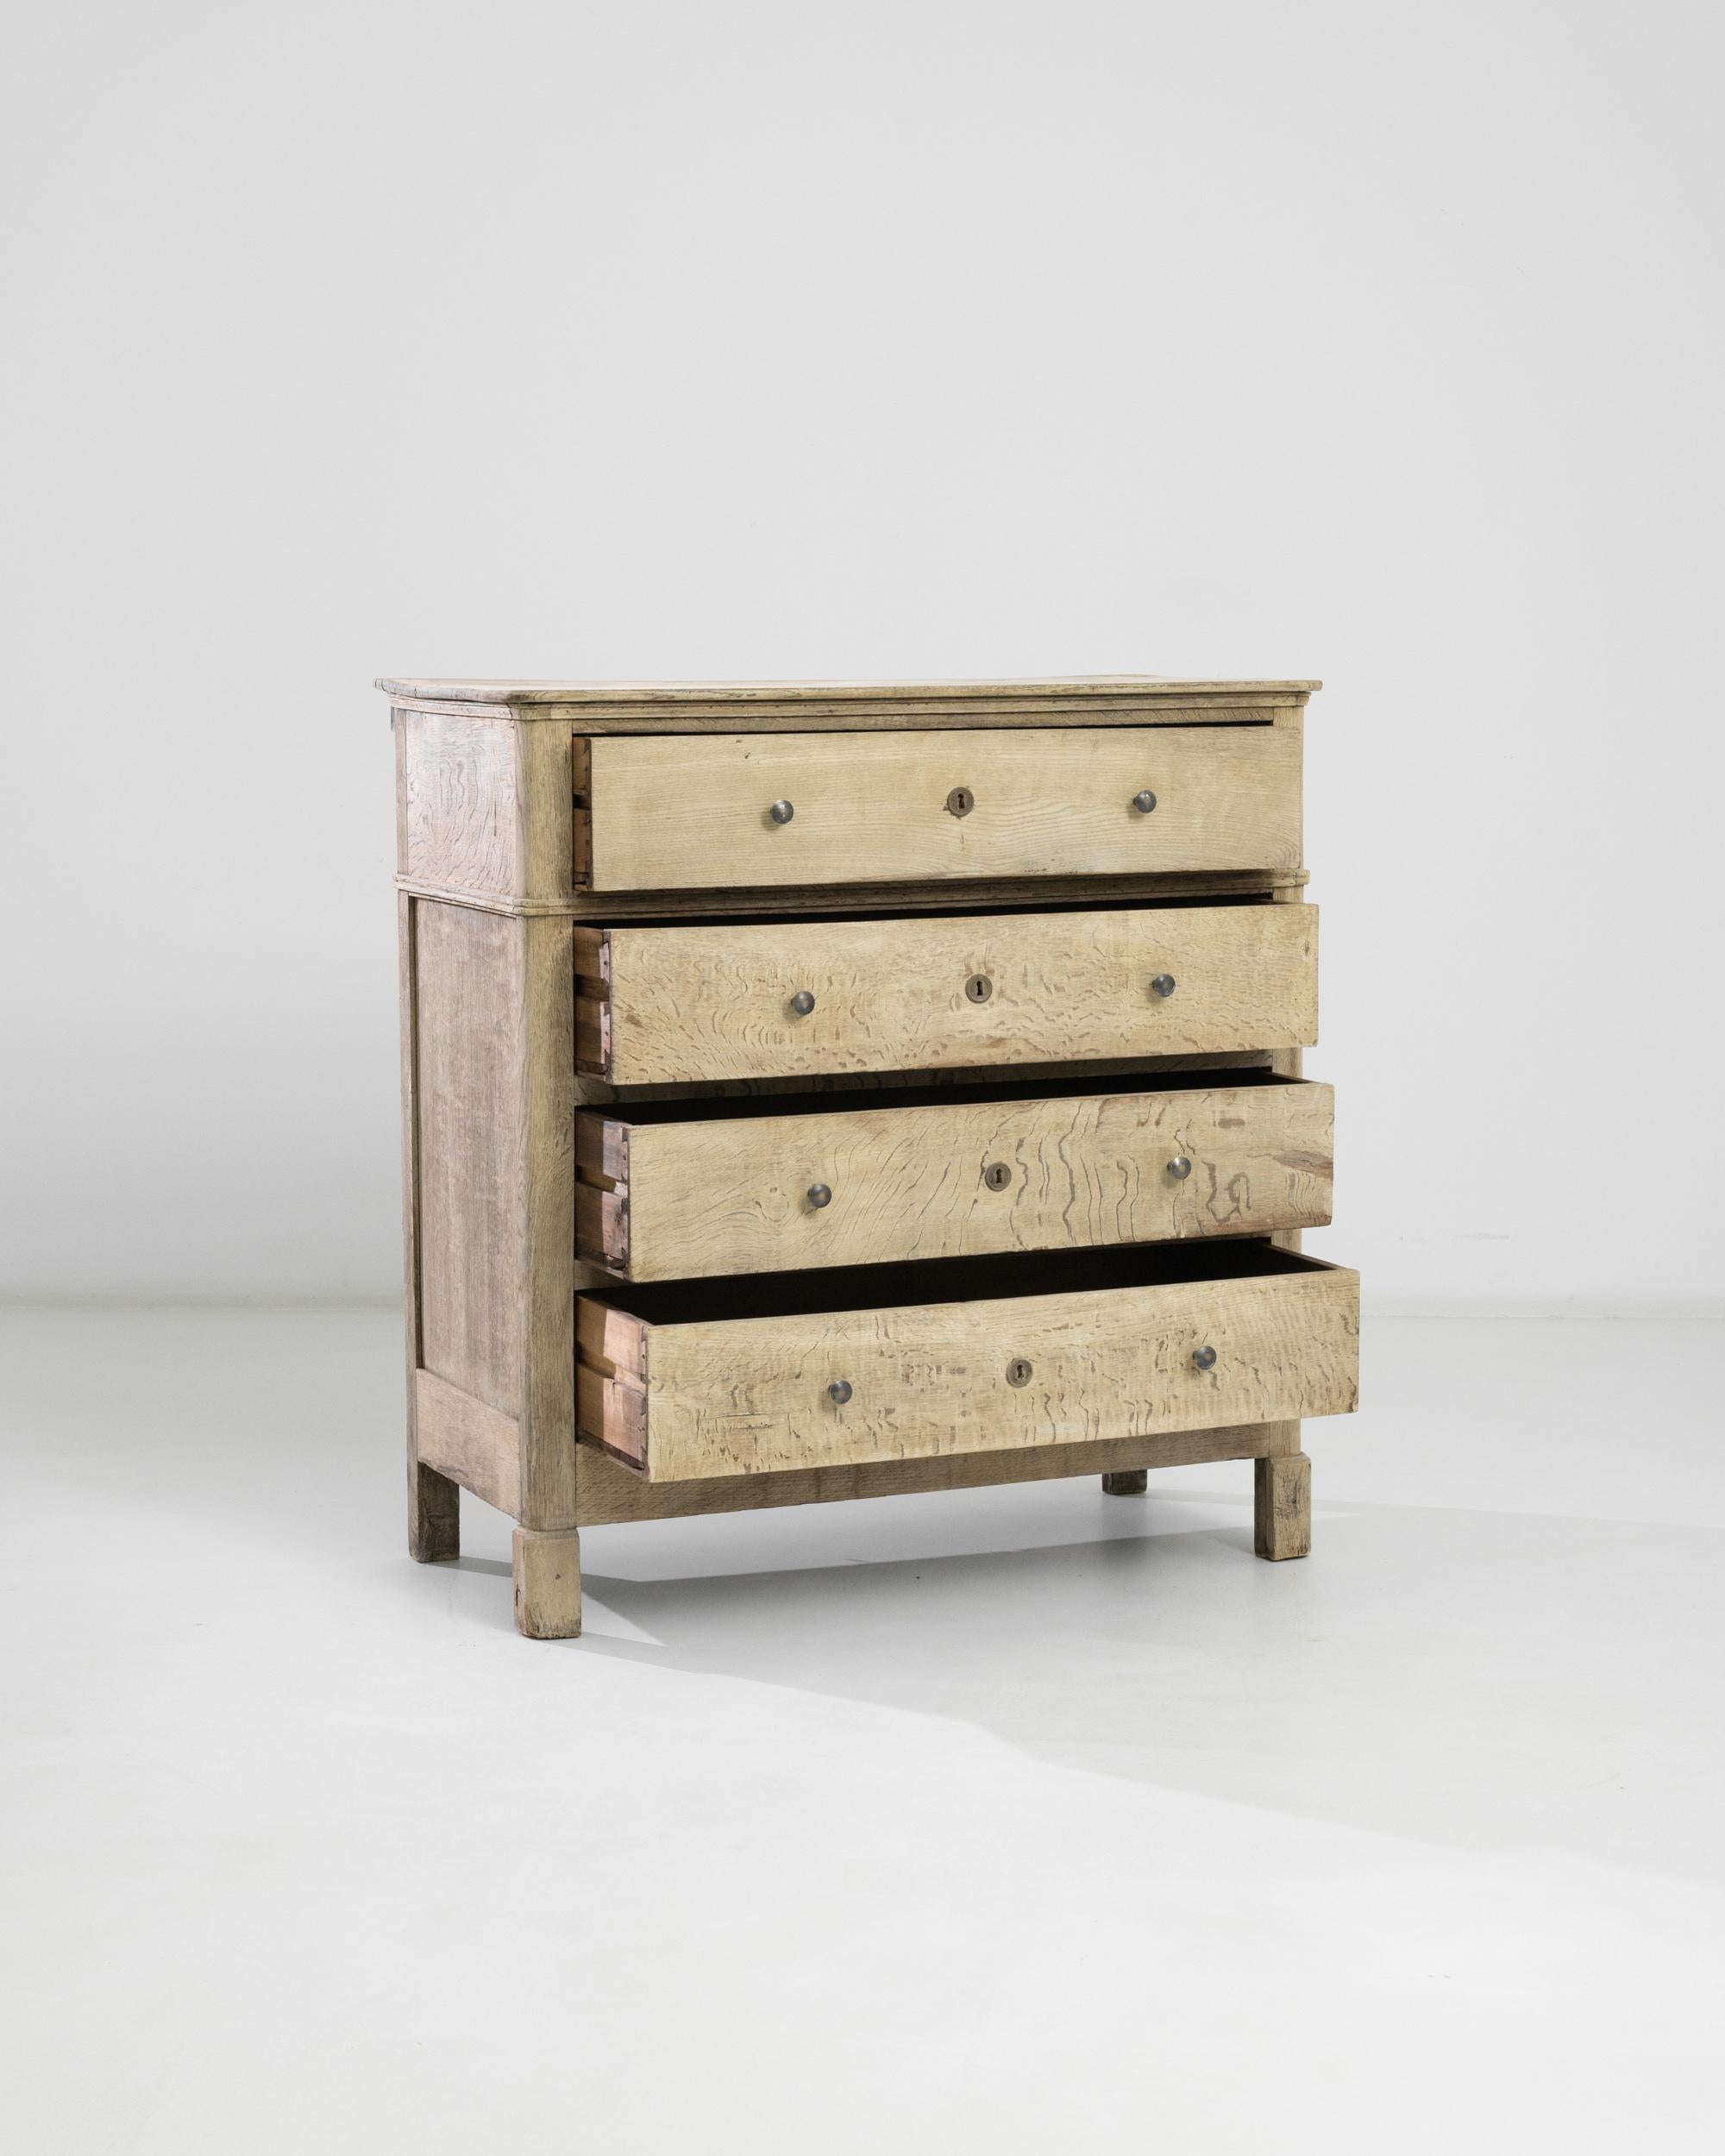 Made in France circa 1880, this oak chest features four deep drawers with original pulls and locks whose roundness makes a contrast with the rectangular-shaped feet. Practical and elegant, this antique chest of drawers recollects the memories of